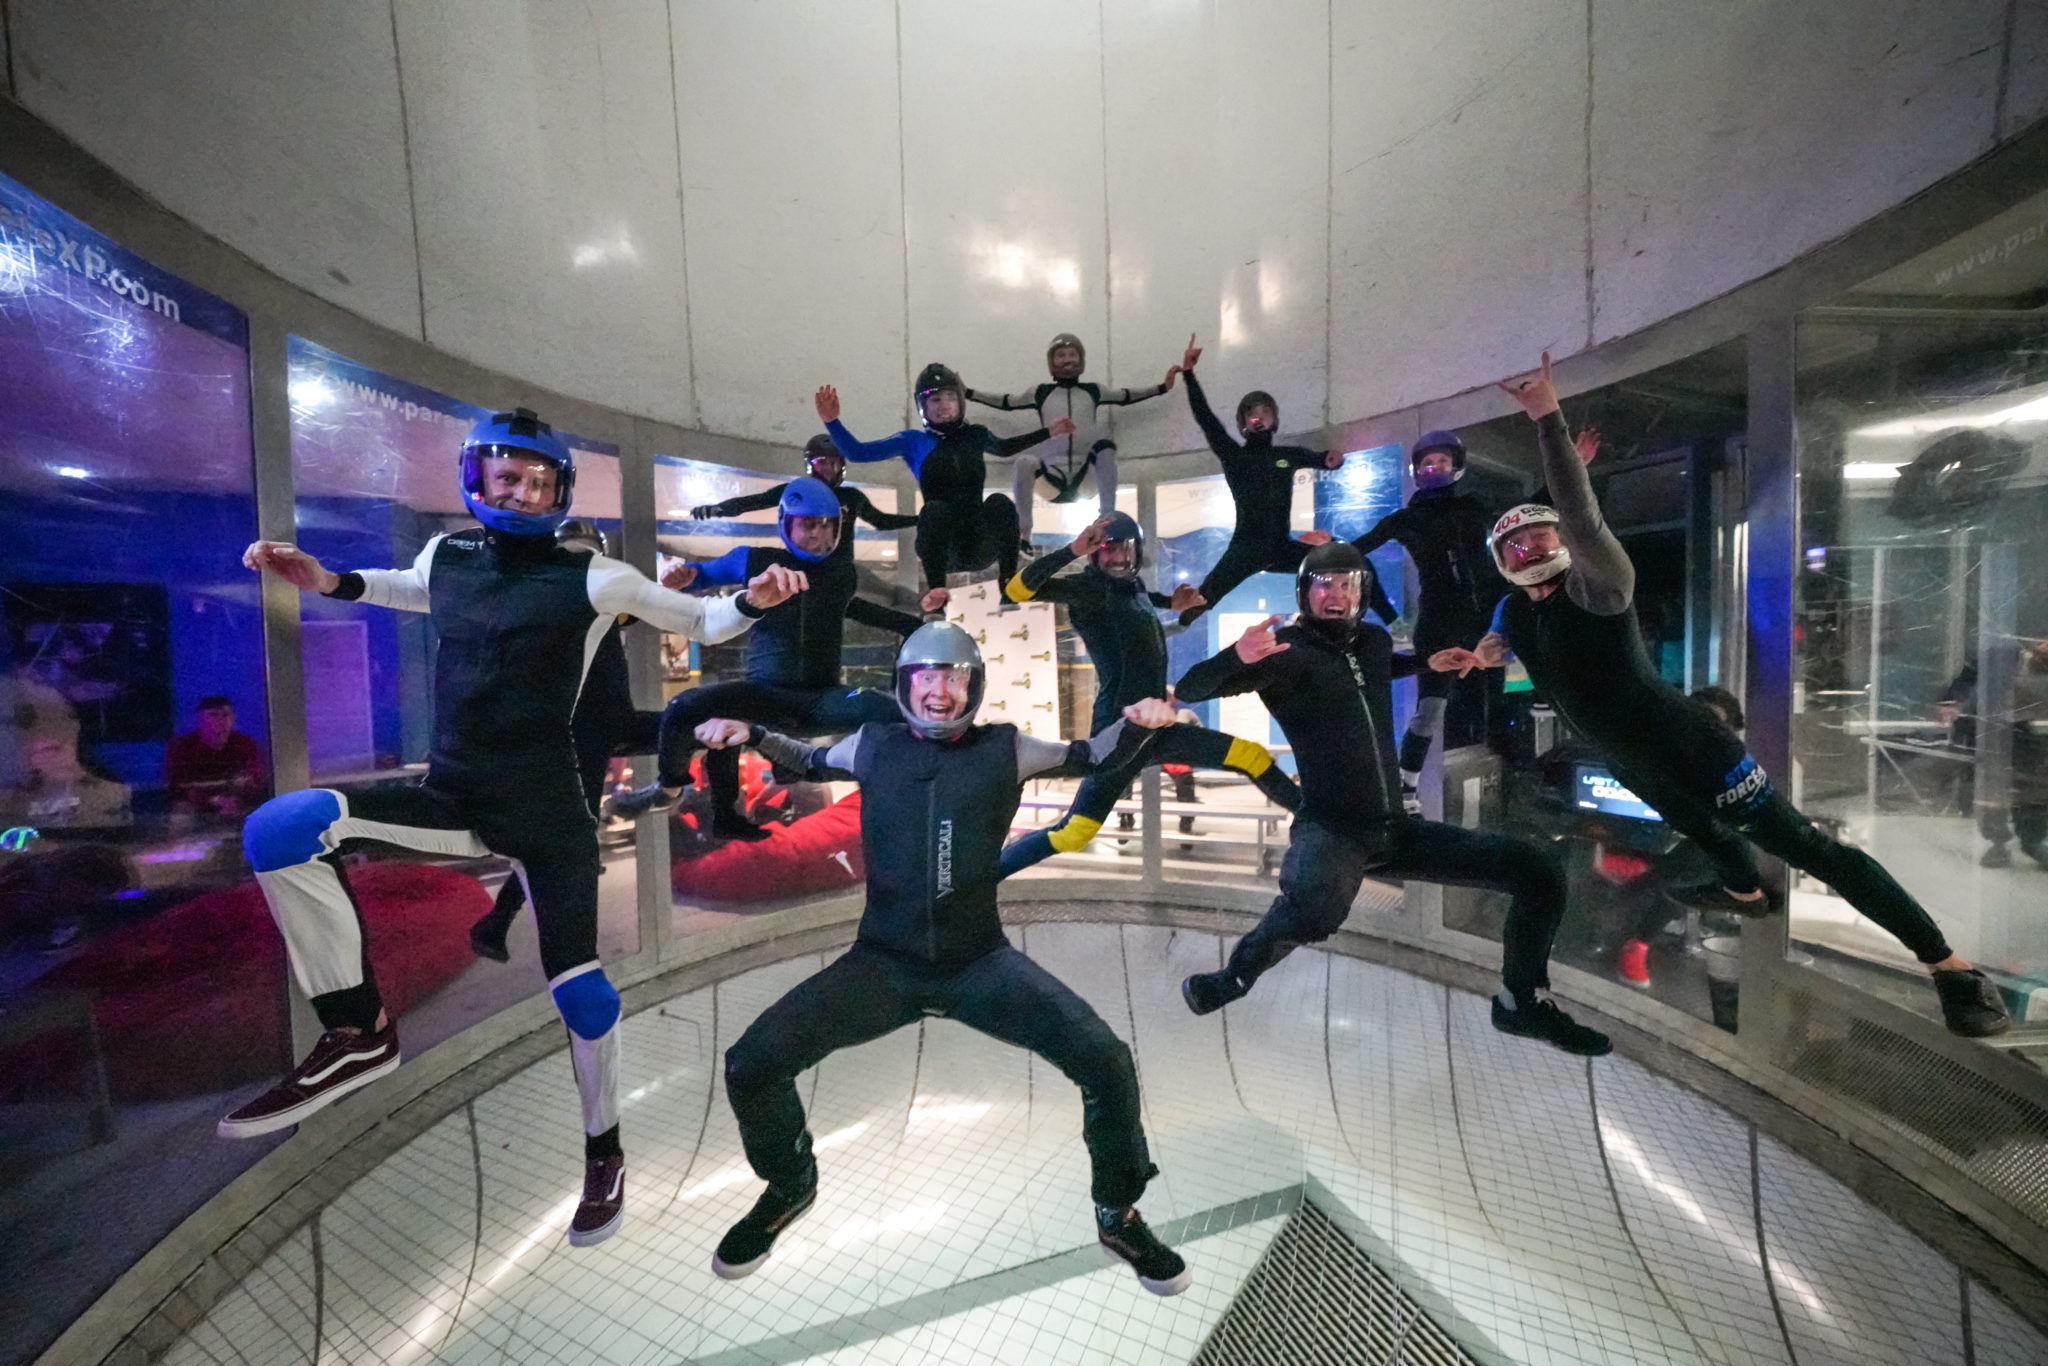 [Top 3] Reasons to Add Indoor Skydiving to Your Bucket List